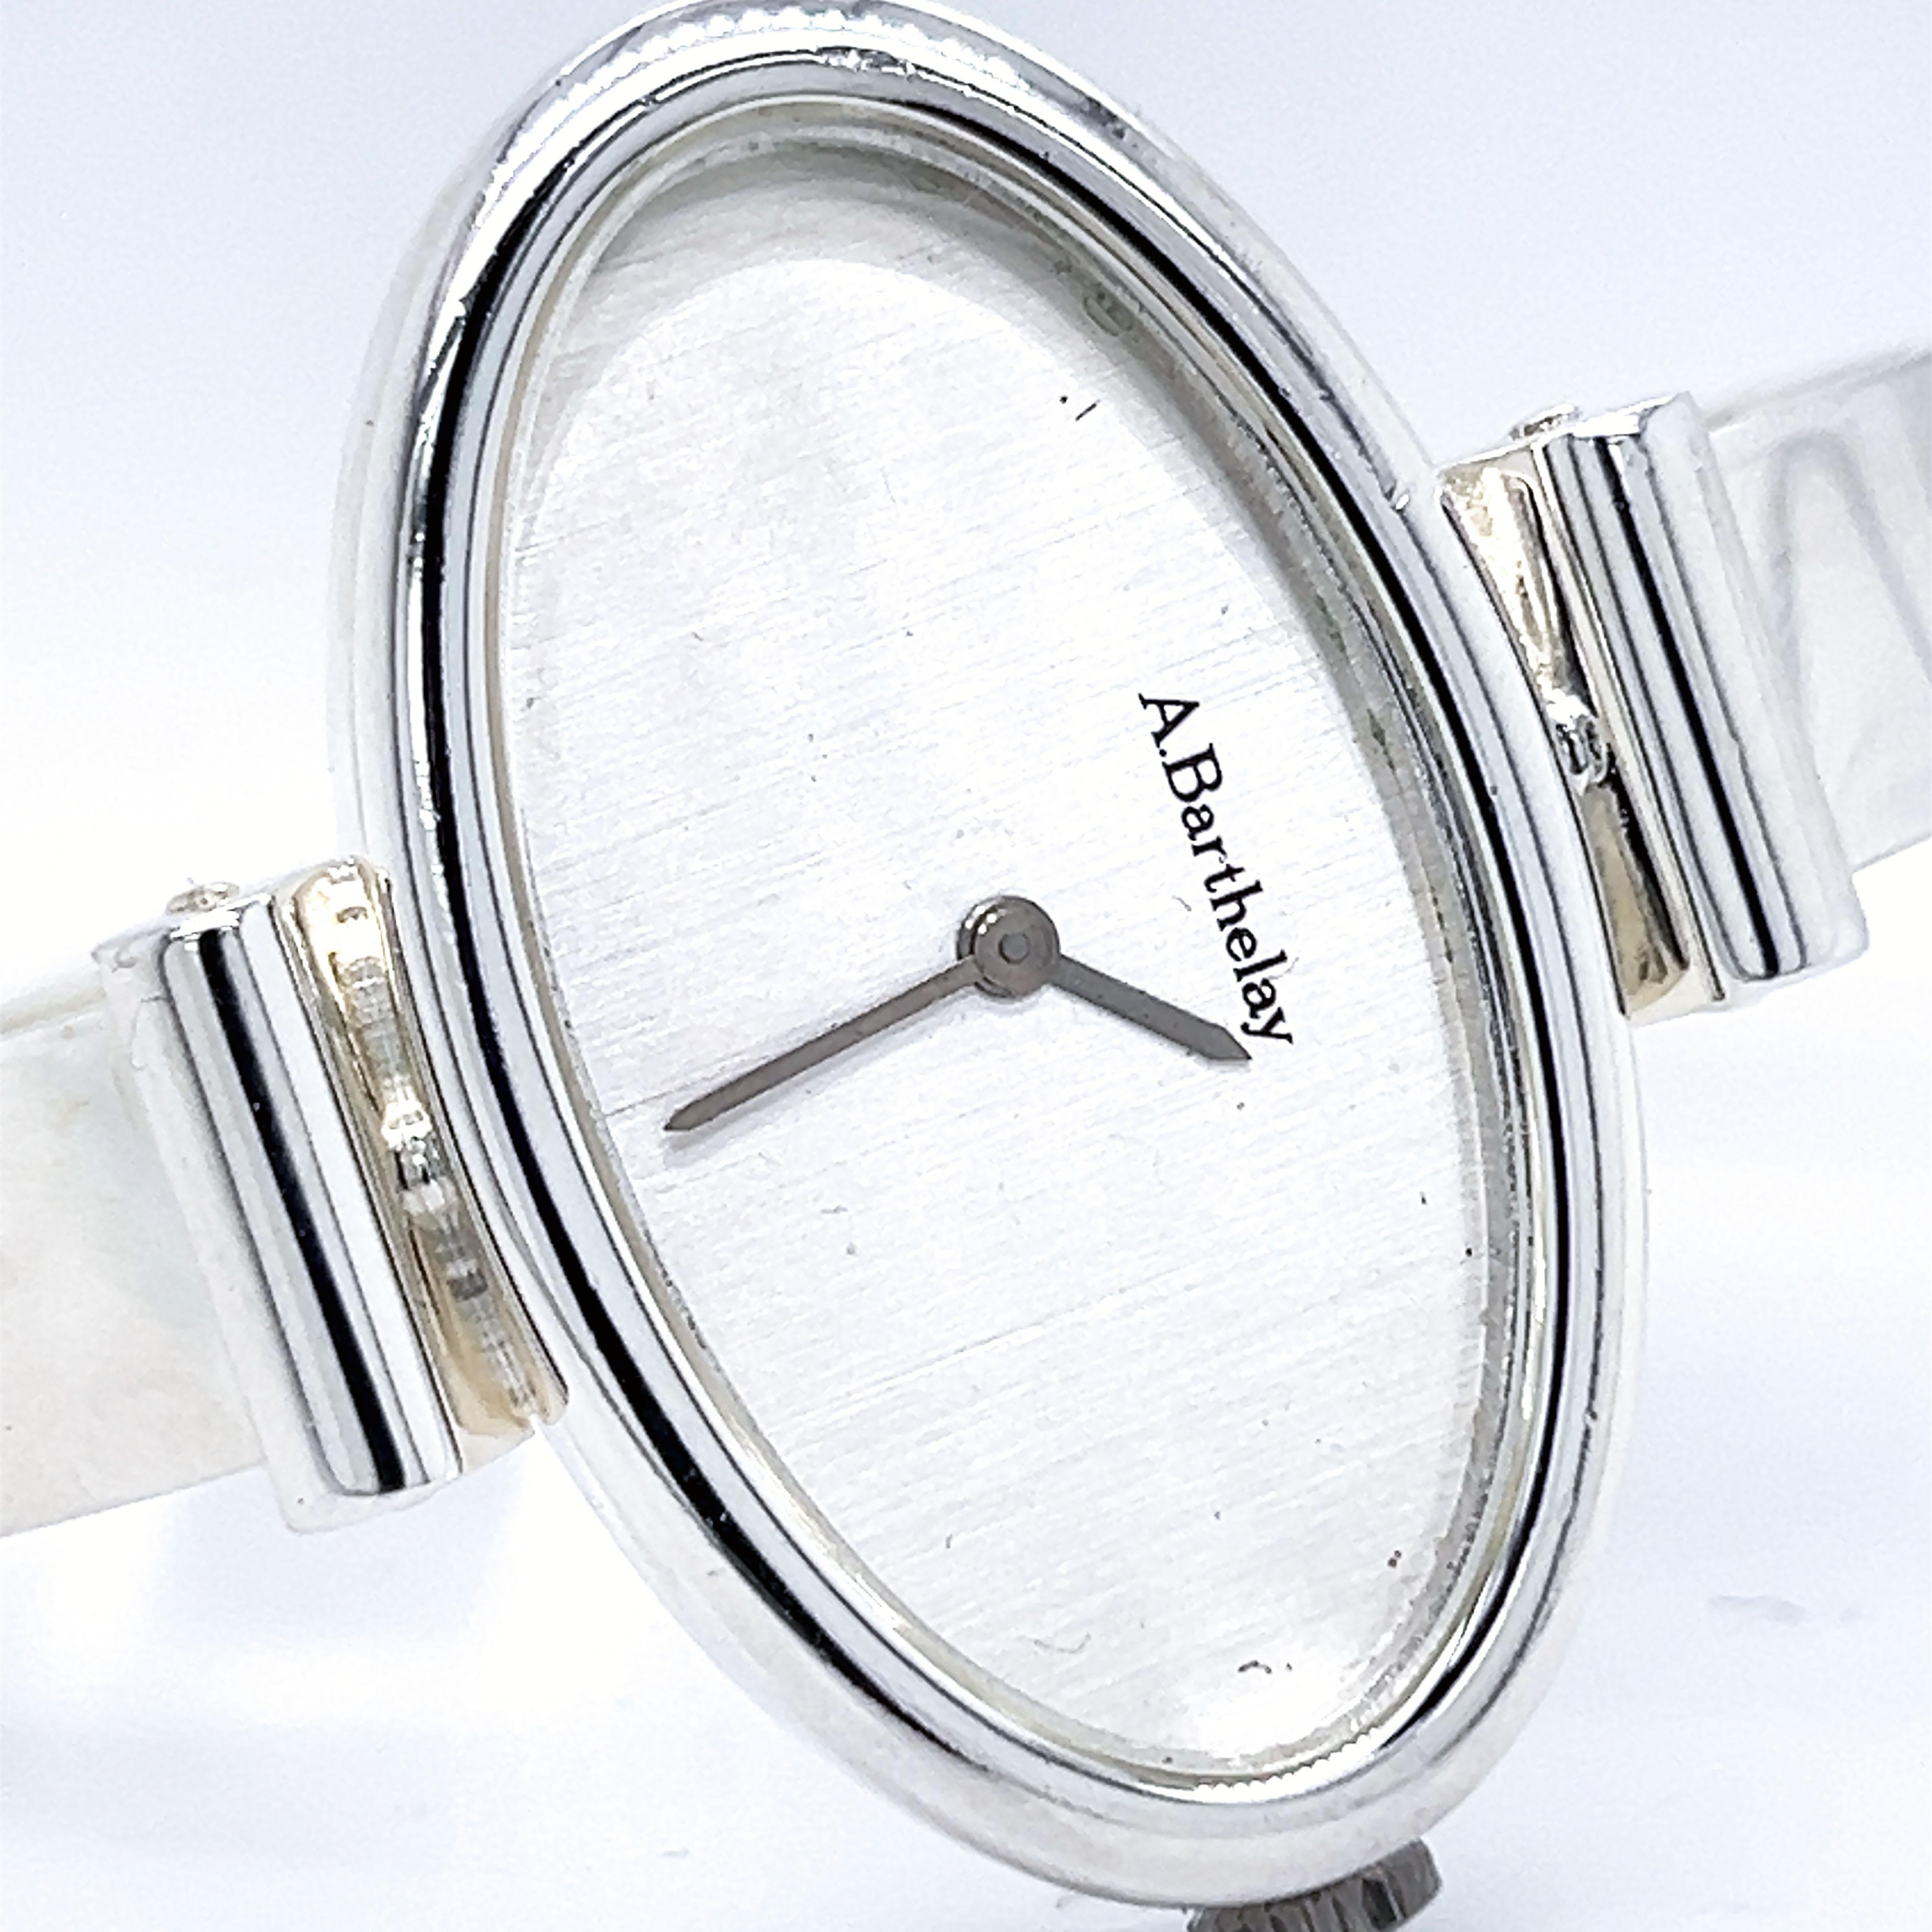 Original 1972, Exquisite Alexis Barthelay Watch, a special piece characterized by an elegant, unique, absolutely chic yet timeless design.
This outstanding Jewel is perfect for all wrists, thanks to an adjustable bracelet: its total lenght is 7.48